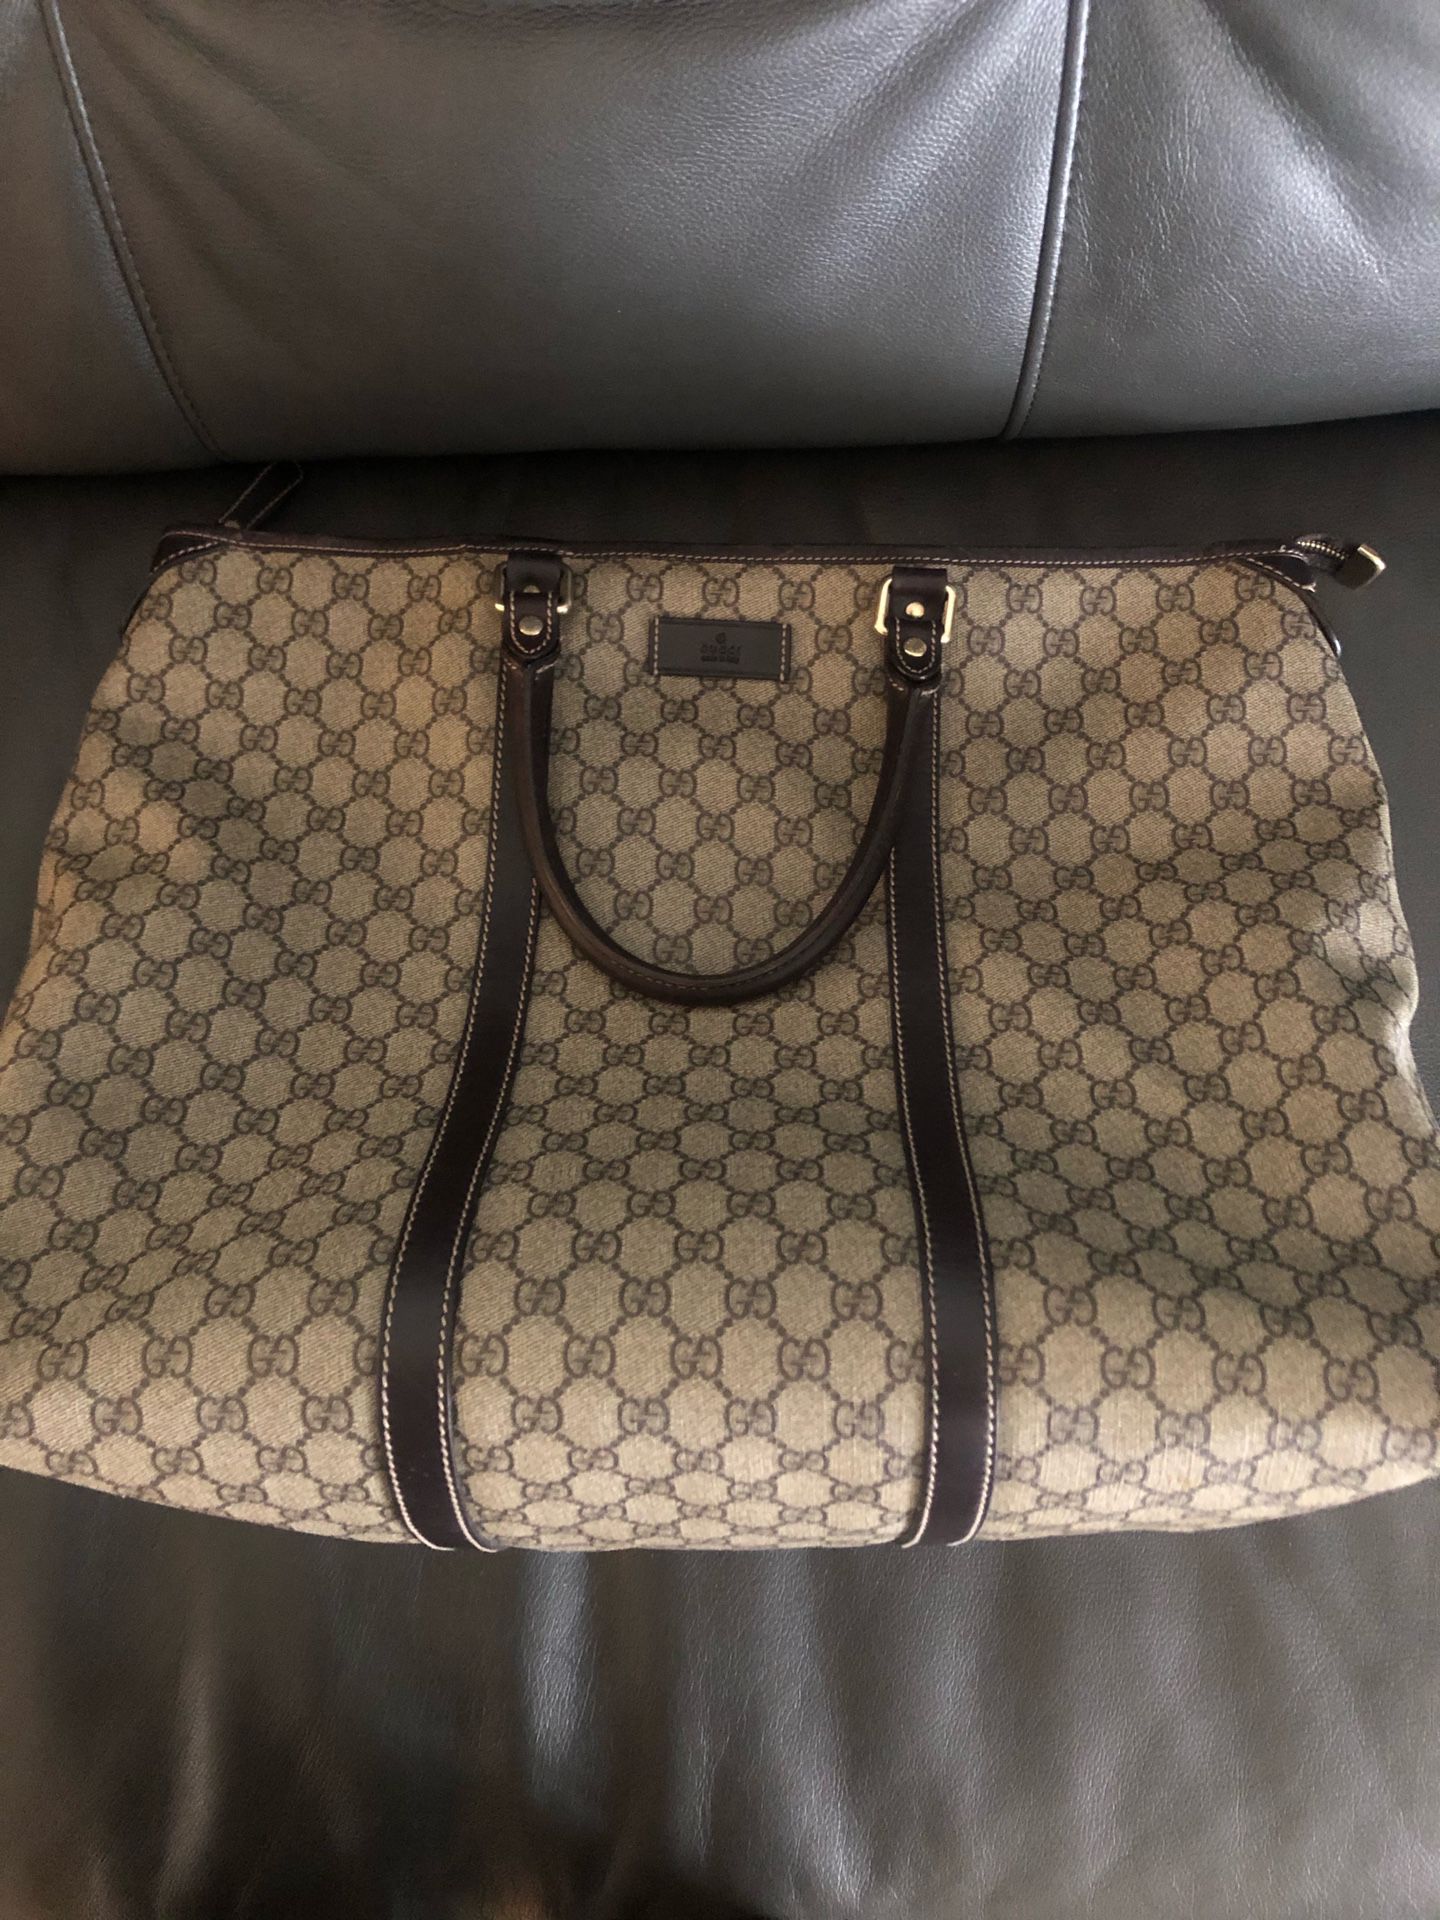 Large GUCCI tote. AUTHENTIC.